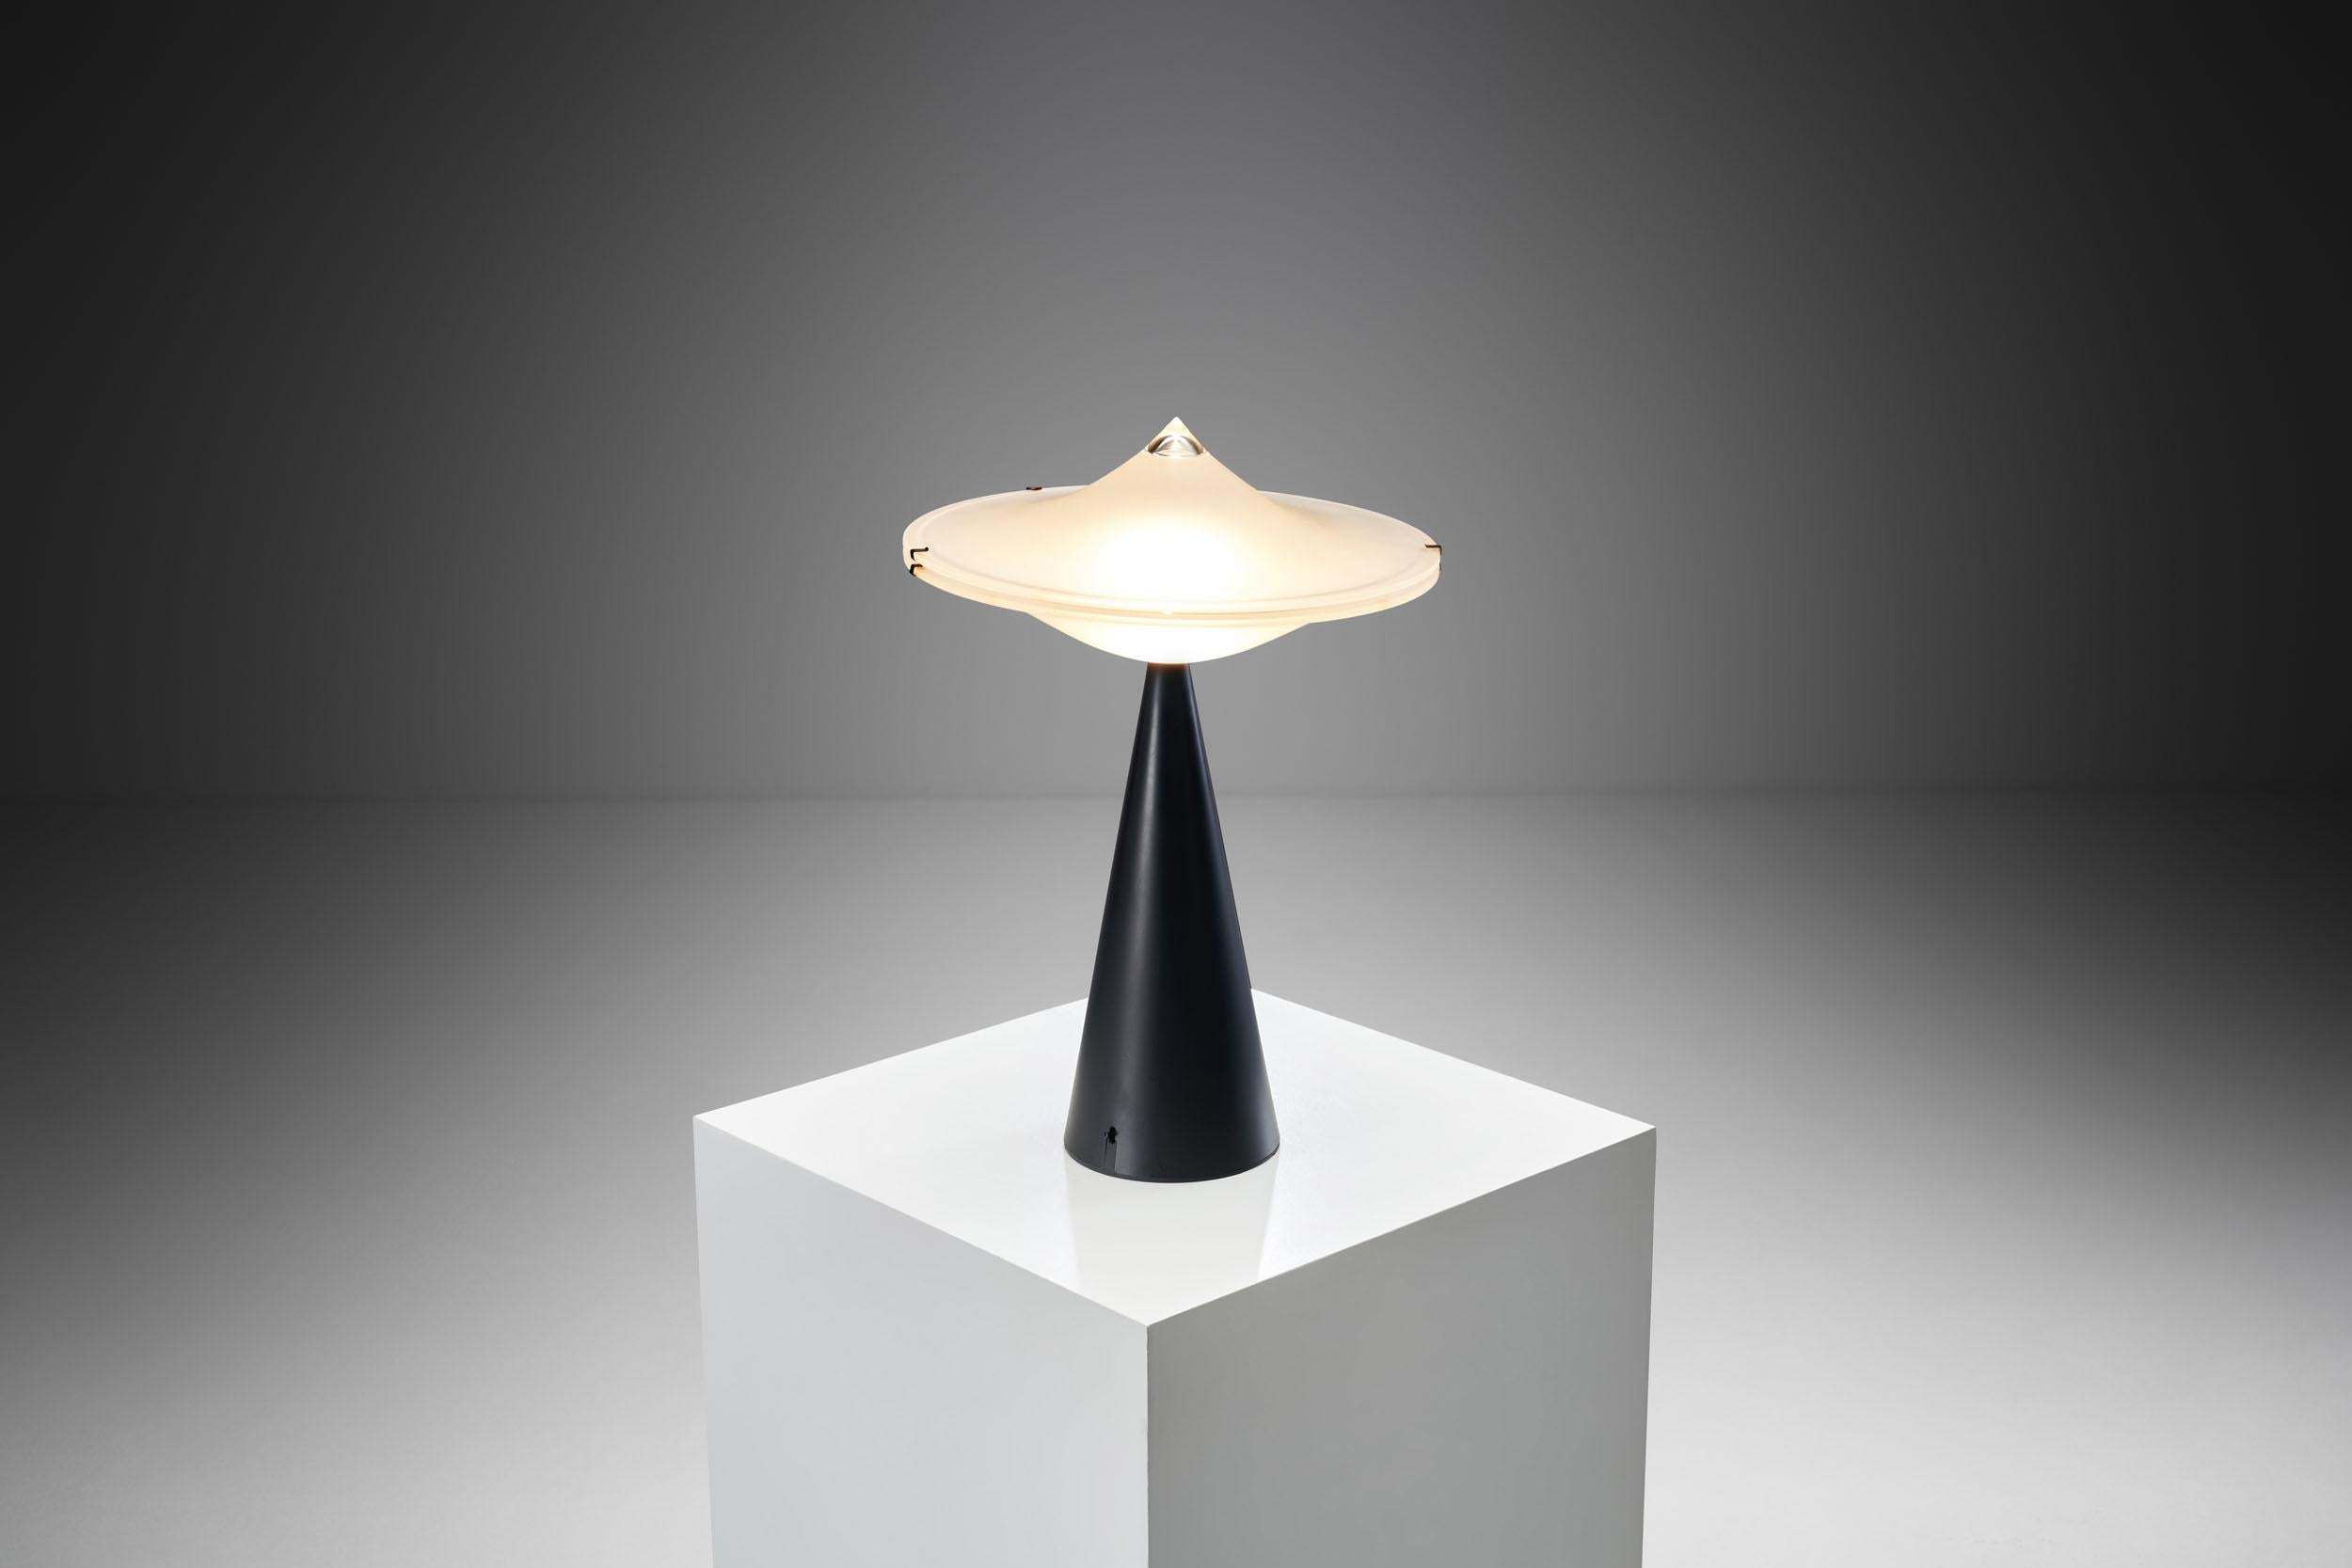 Luciano Cesaro is without a doubt best known for his futuristic, space age designs. Among his creations, this “Alien” lamp is perhaps the most well-known. The Italian designer was a source of infinite creativity and design edge, that led to the